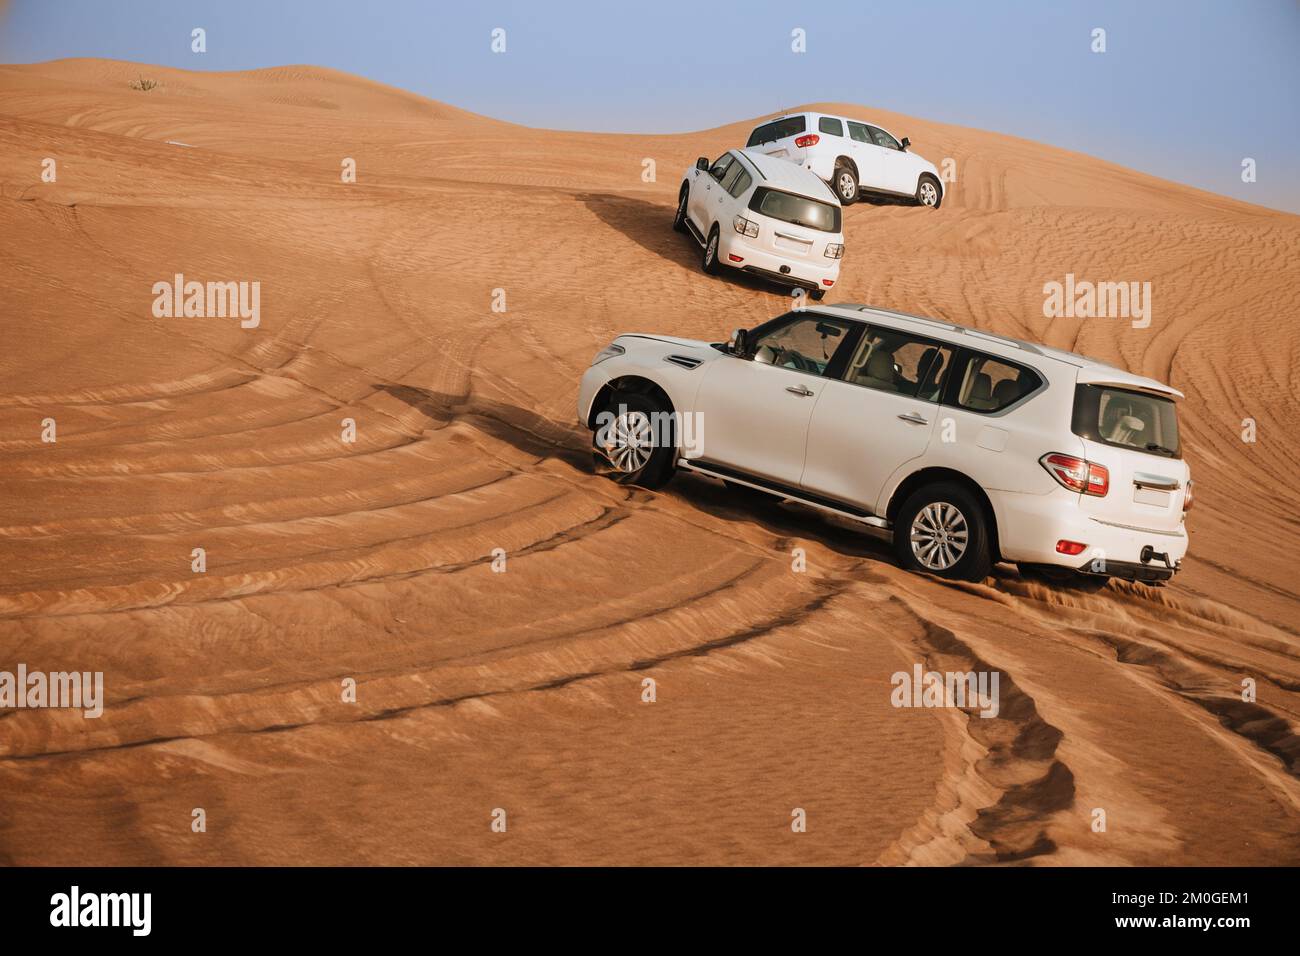 Dubai, United Arab Emirates - 01, July 2021 : Race in sand desert. Competition racing challenge desert. Car drives offroad with clouds of dust. Offroad vehicle racing with obstacles in wilderness Stock Photo